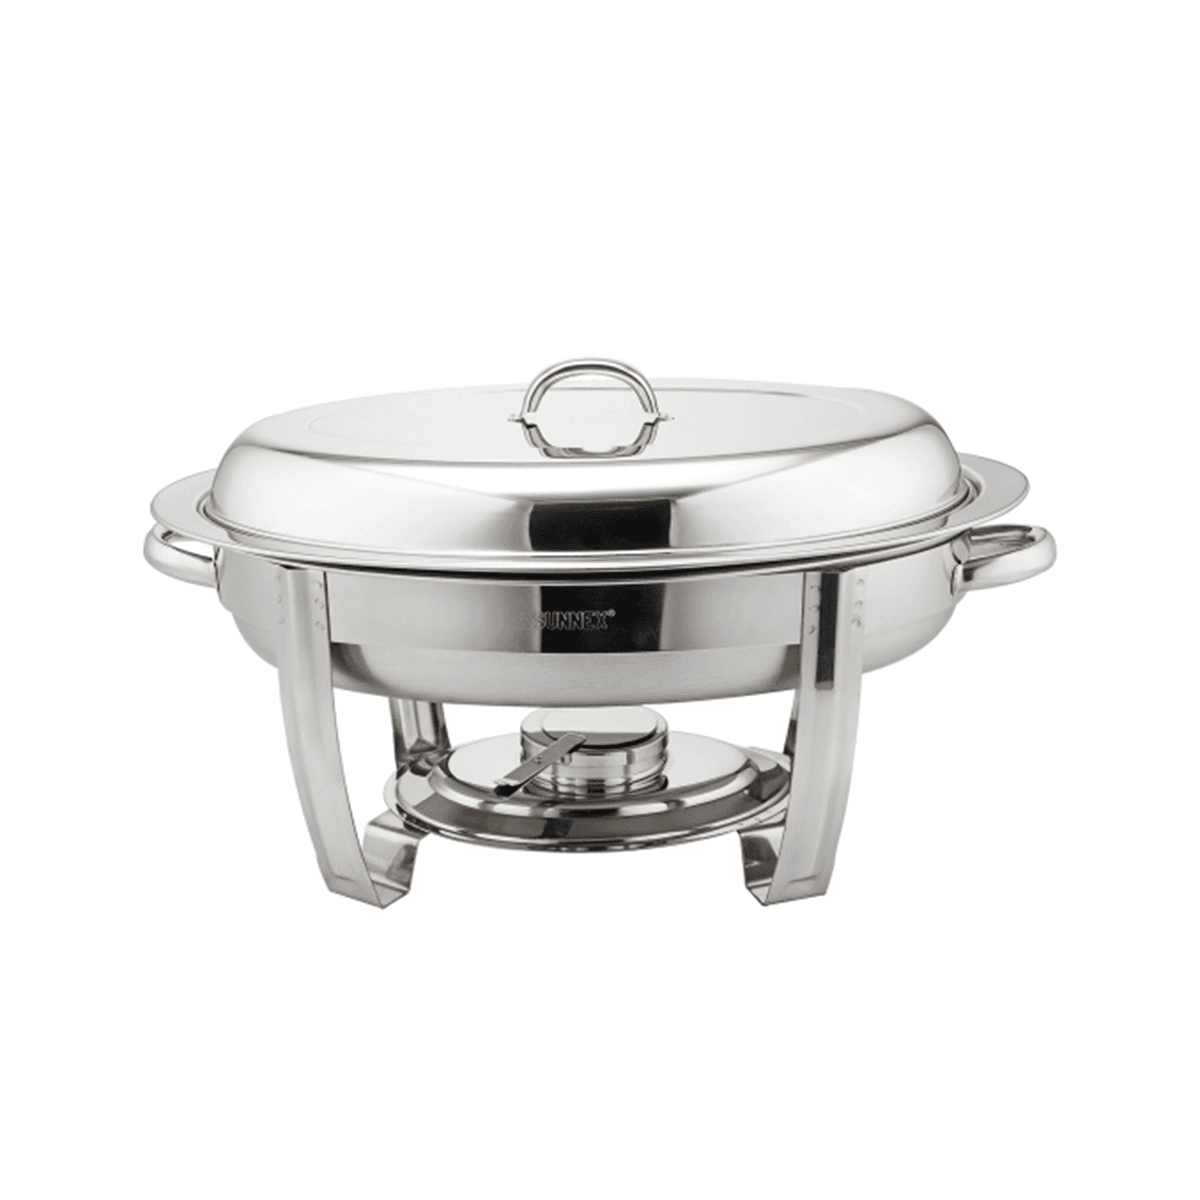 Sunnex Regal Stainless Steel Chafer Oval Silver Transparent Stainless Steel